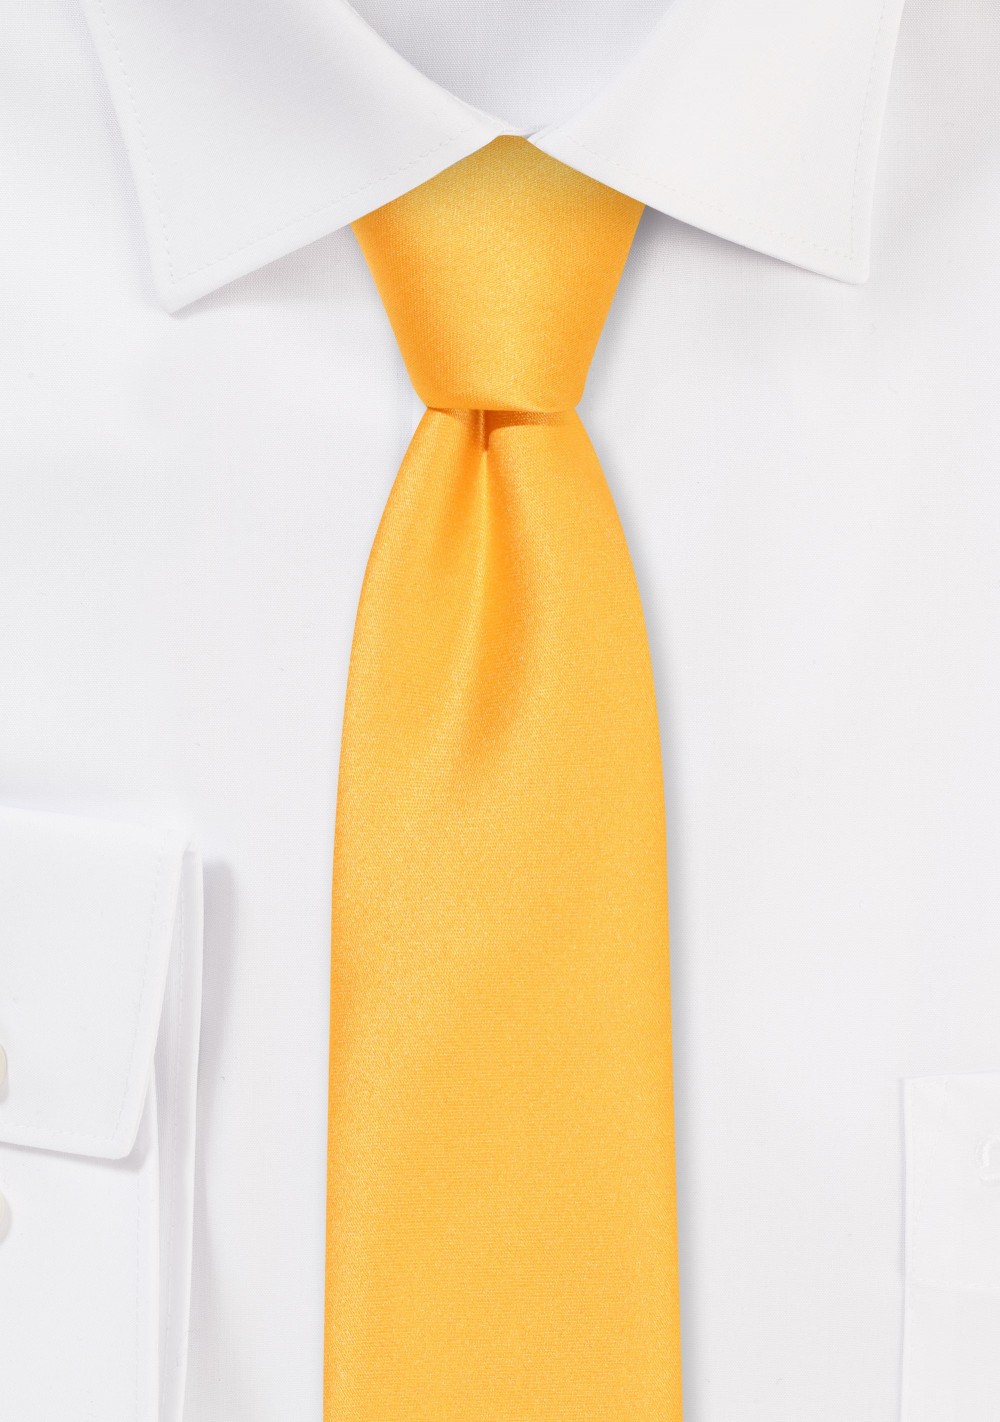 Solid Satin Skinny Tie in Amber Gold